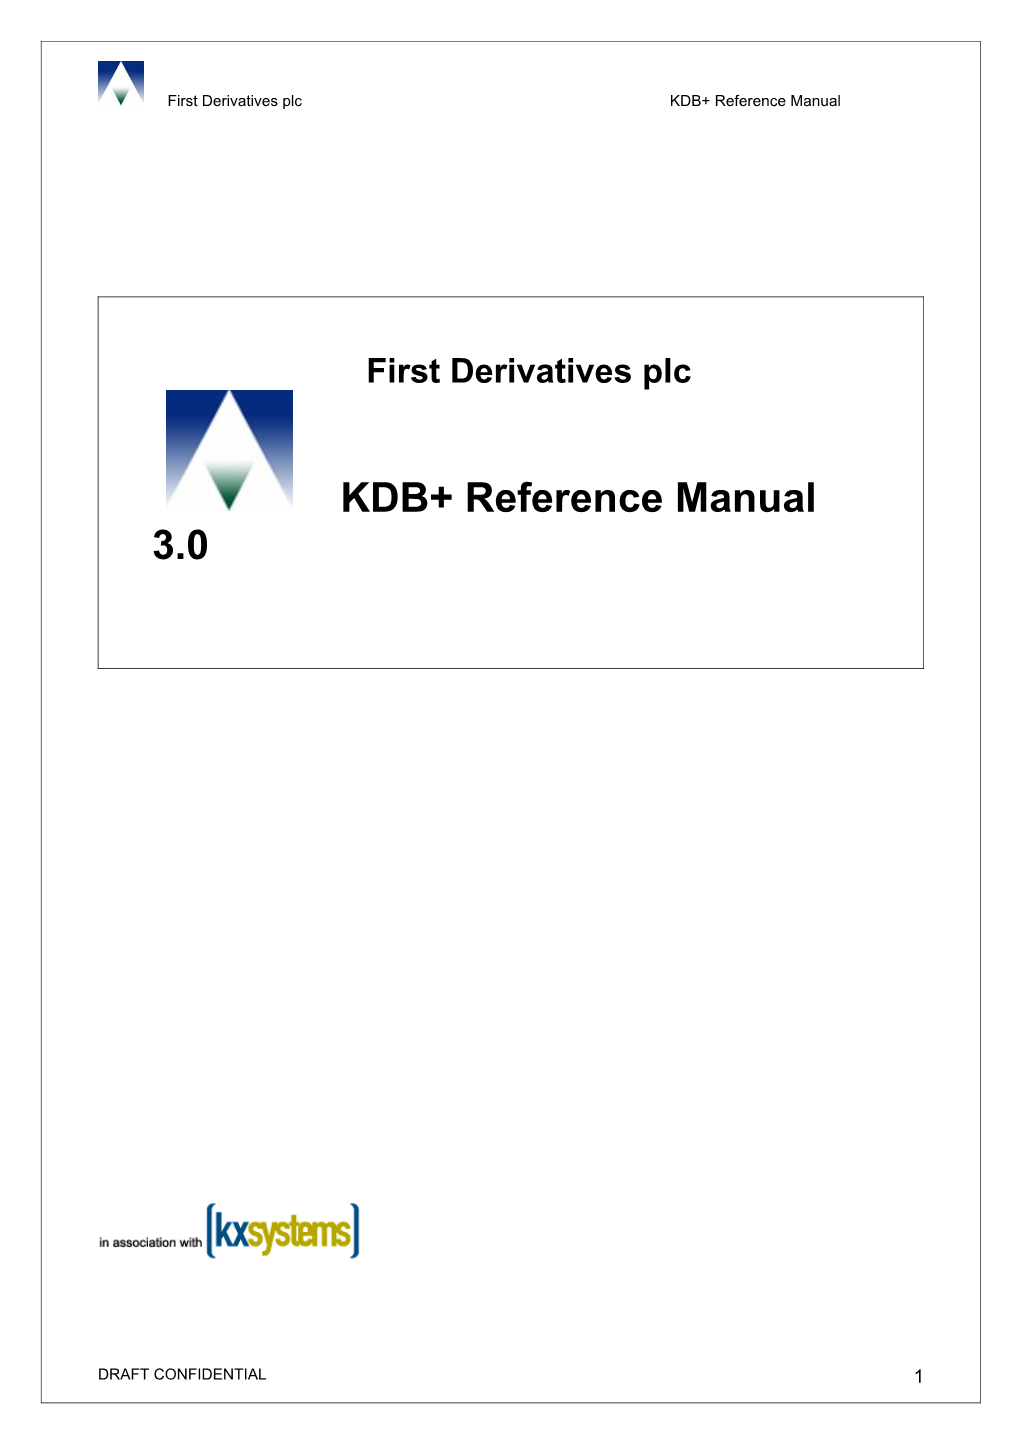 First Derivatives Plc KDB+ Reference Manual